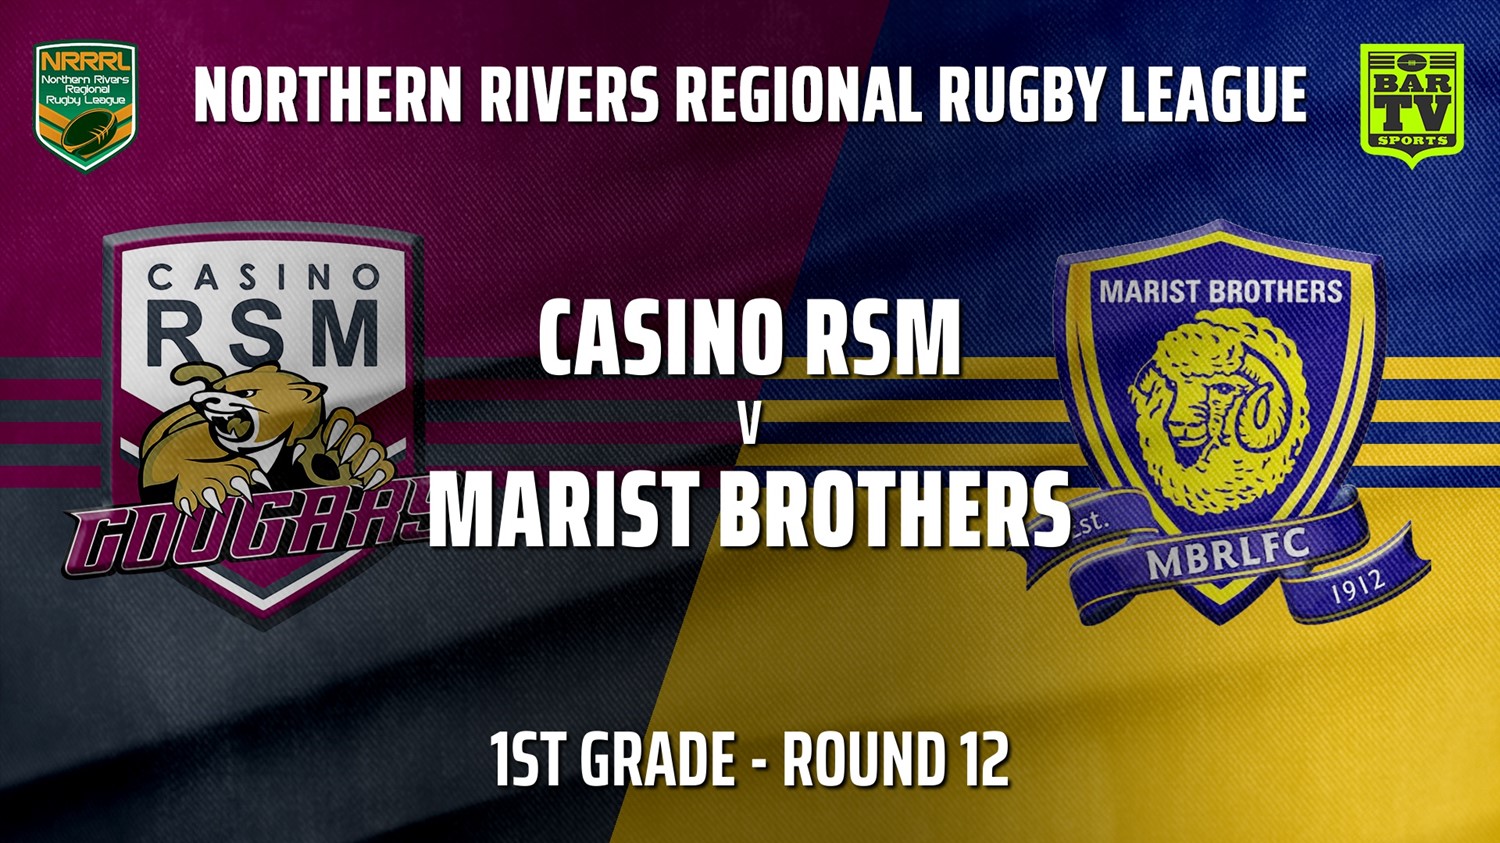 210725-Northern Rivers Round 12 - 1st Grade - Casino RSM Cougars v Lismore Marist Brothers Rams Slate Image